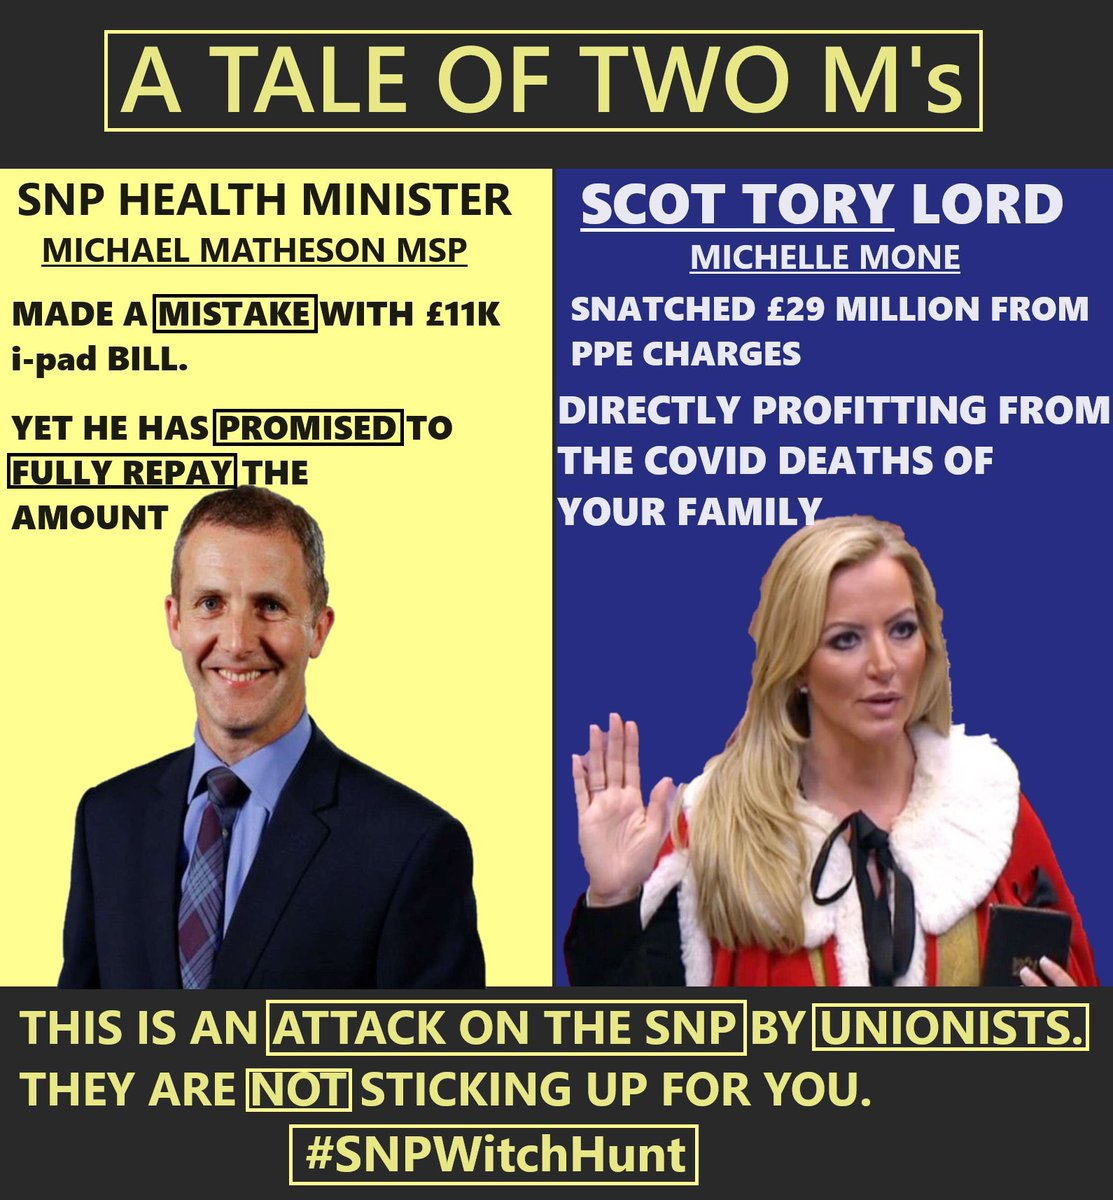 Stand your ground @MathesonMichael